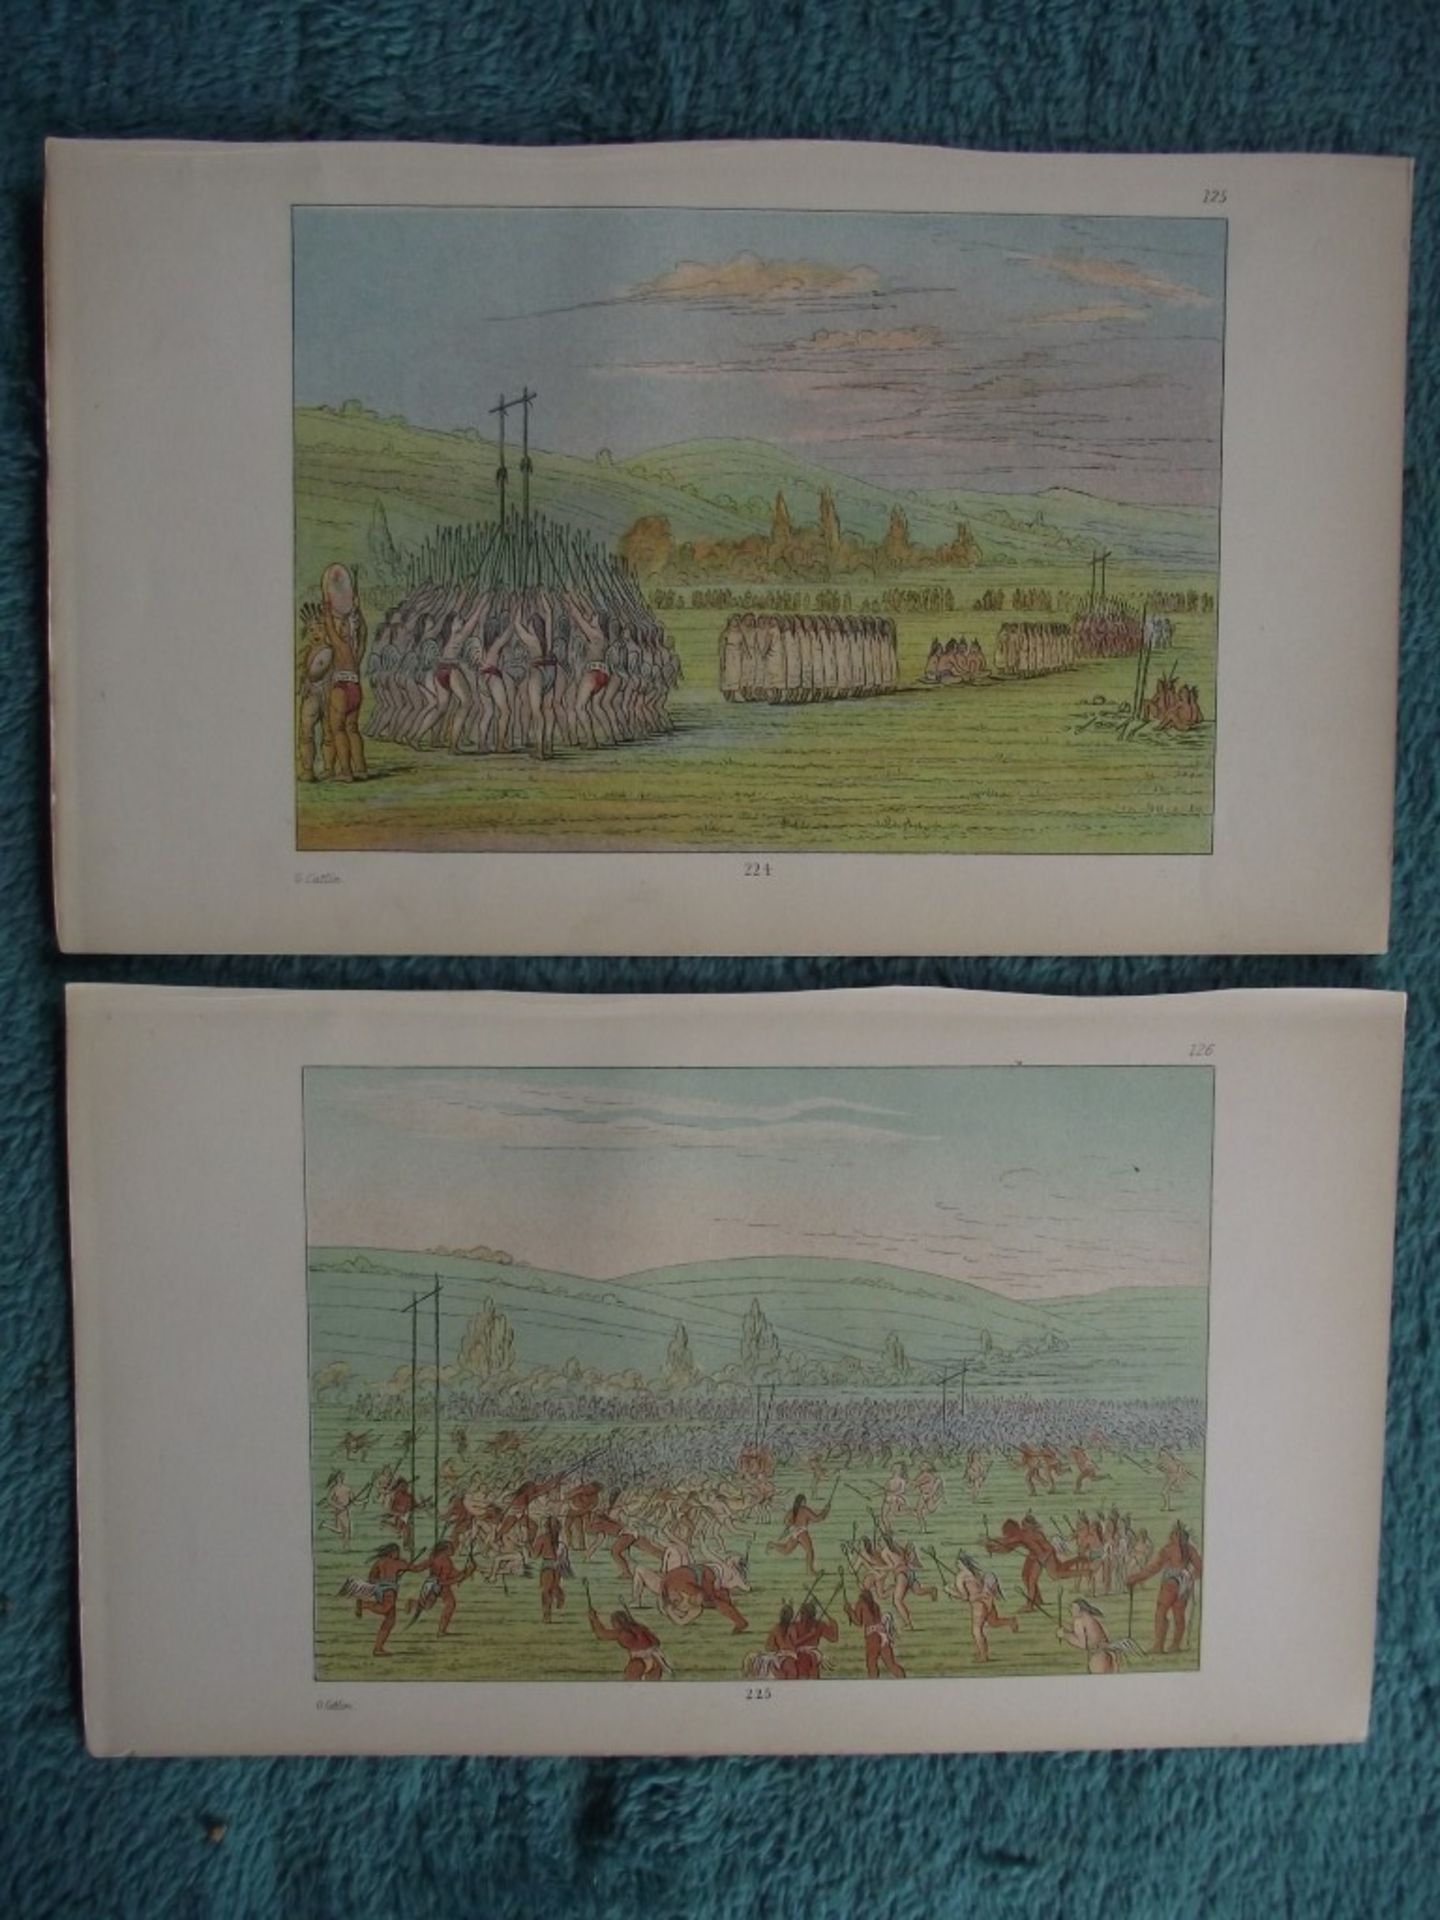 65 X book plates - George Catlin - Illustrations of the North American Indians - Circa 1876 - Image 19 of 40